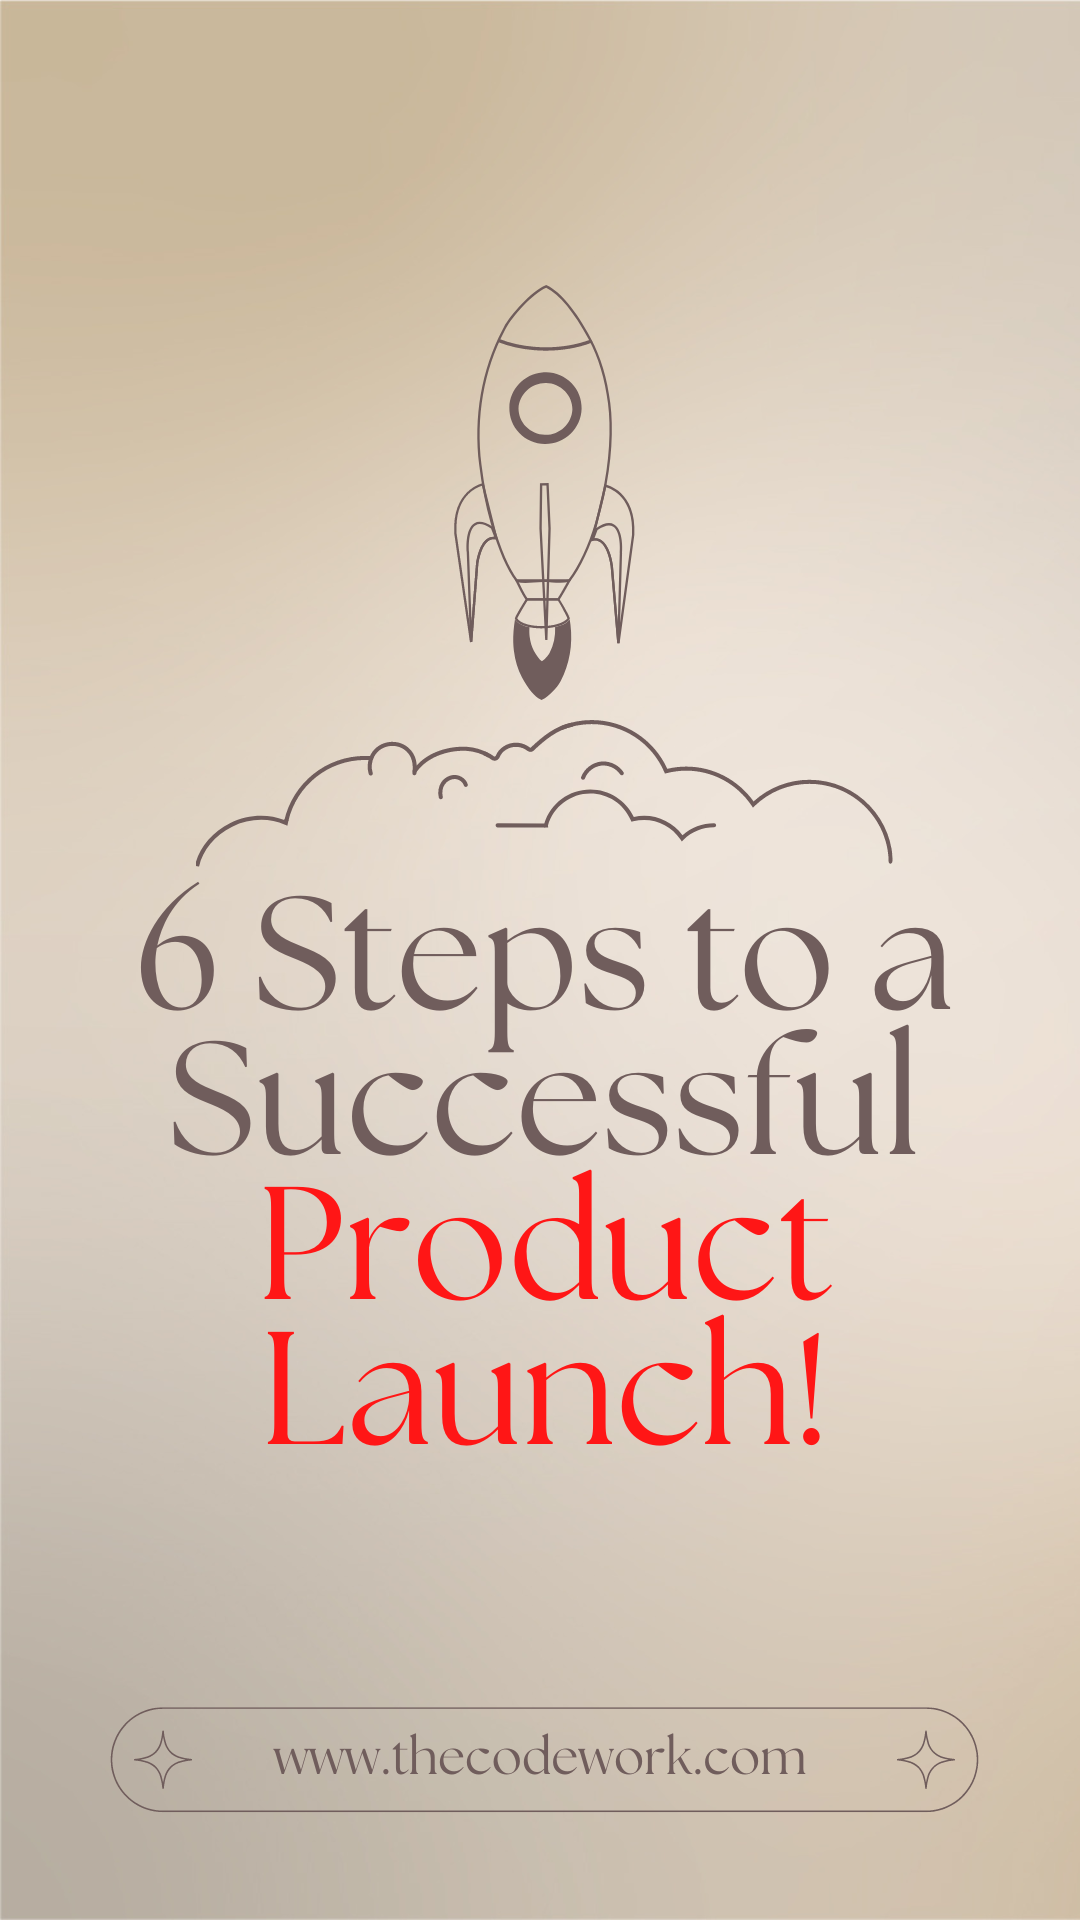 6 Steps to a Successful Product Launch! 